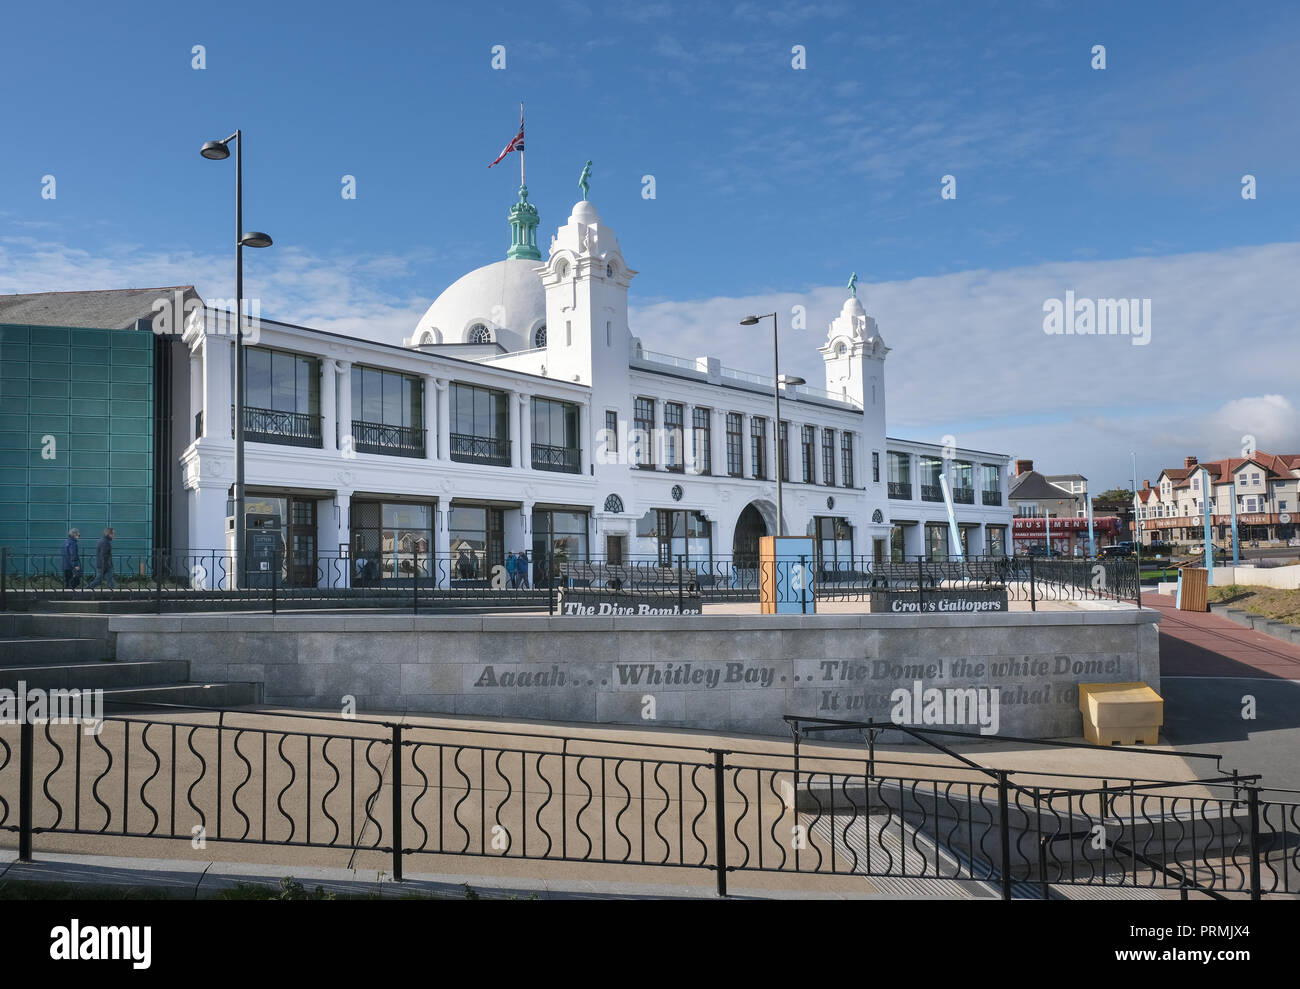 Spanish City dining-and-leisure centre in Whitley Bay, seaside town in North Tyneside, Tyne & Wear. Recently renovated. Stock Photo